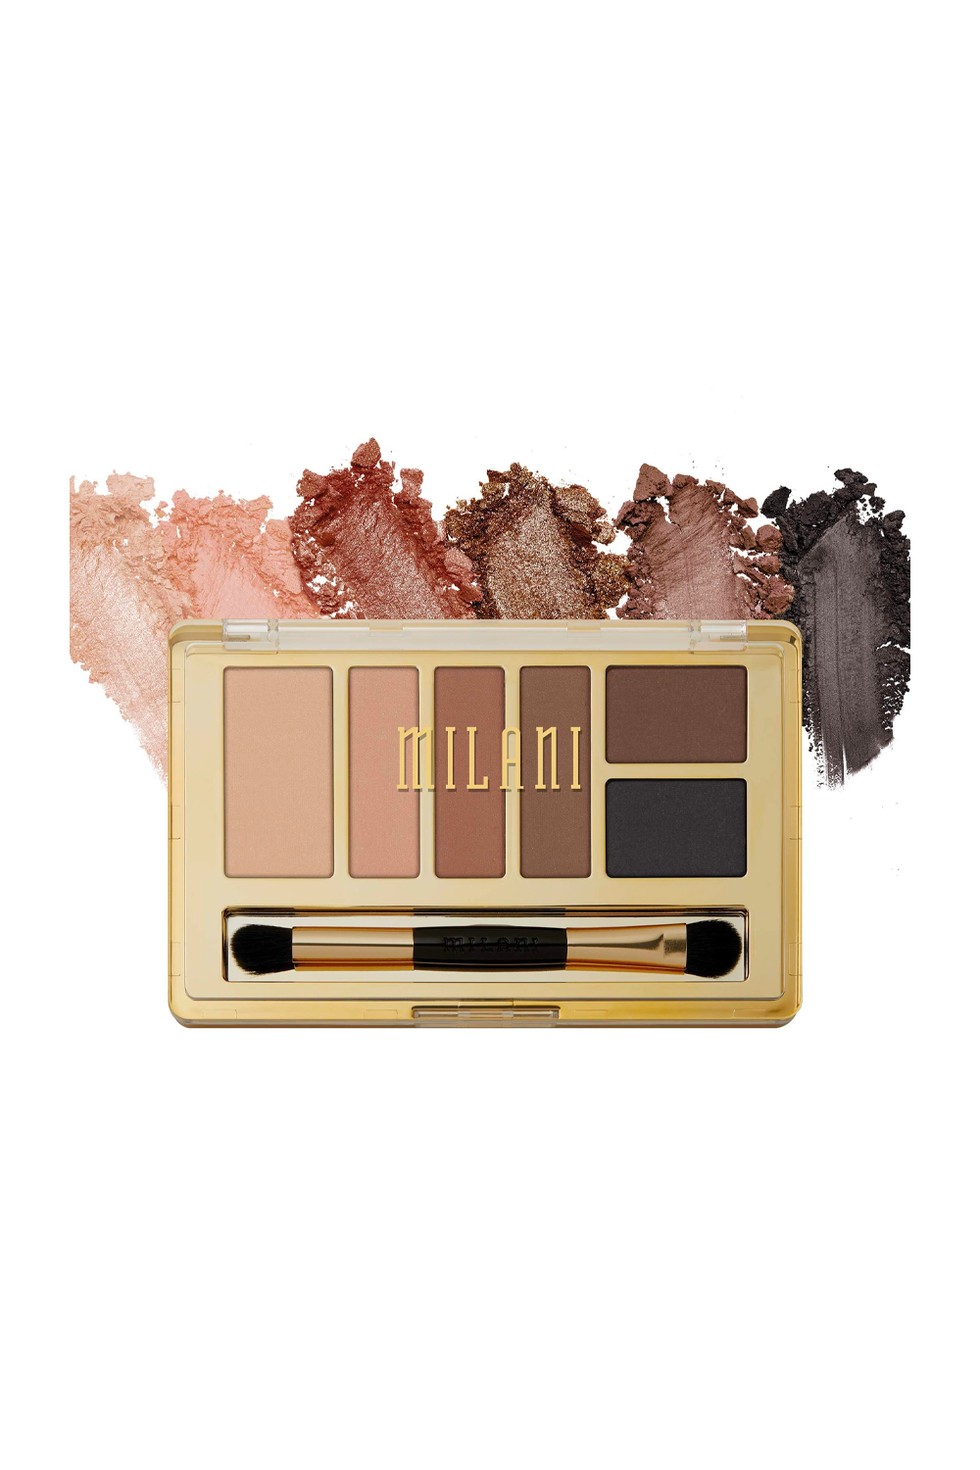 Best Pro Eyeshadow Palette Makeup - Matte Shimmer 16 Colors - Highly  Pigmented - Professional Nudes Warm Natural Bronze Neutral Smoky Cosmetic  Eye